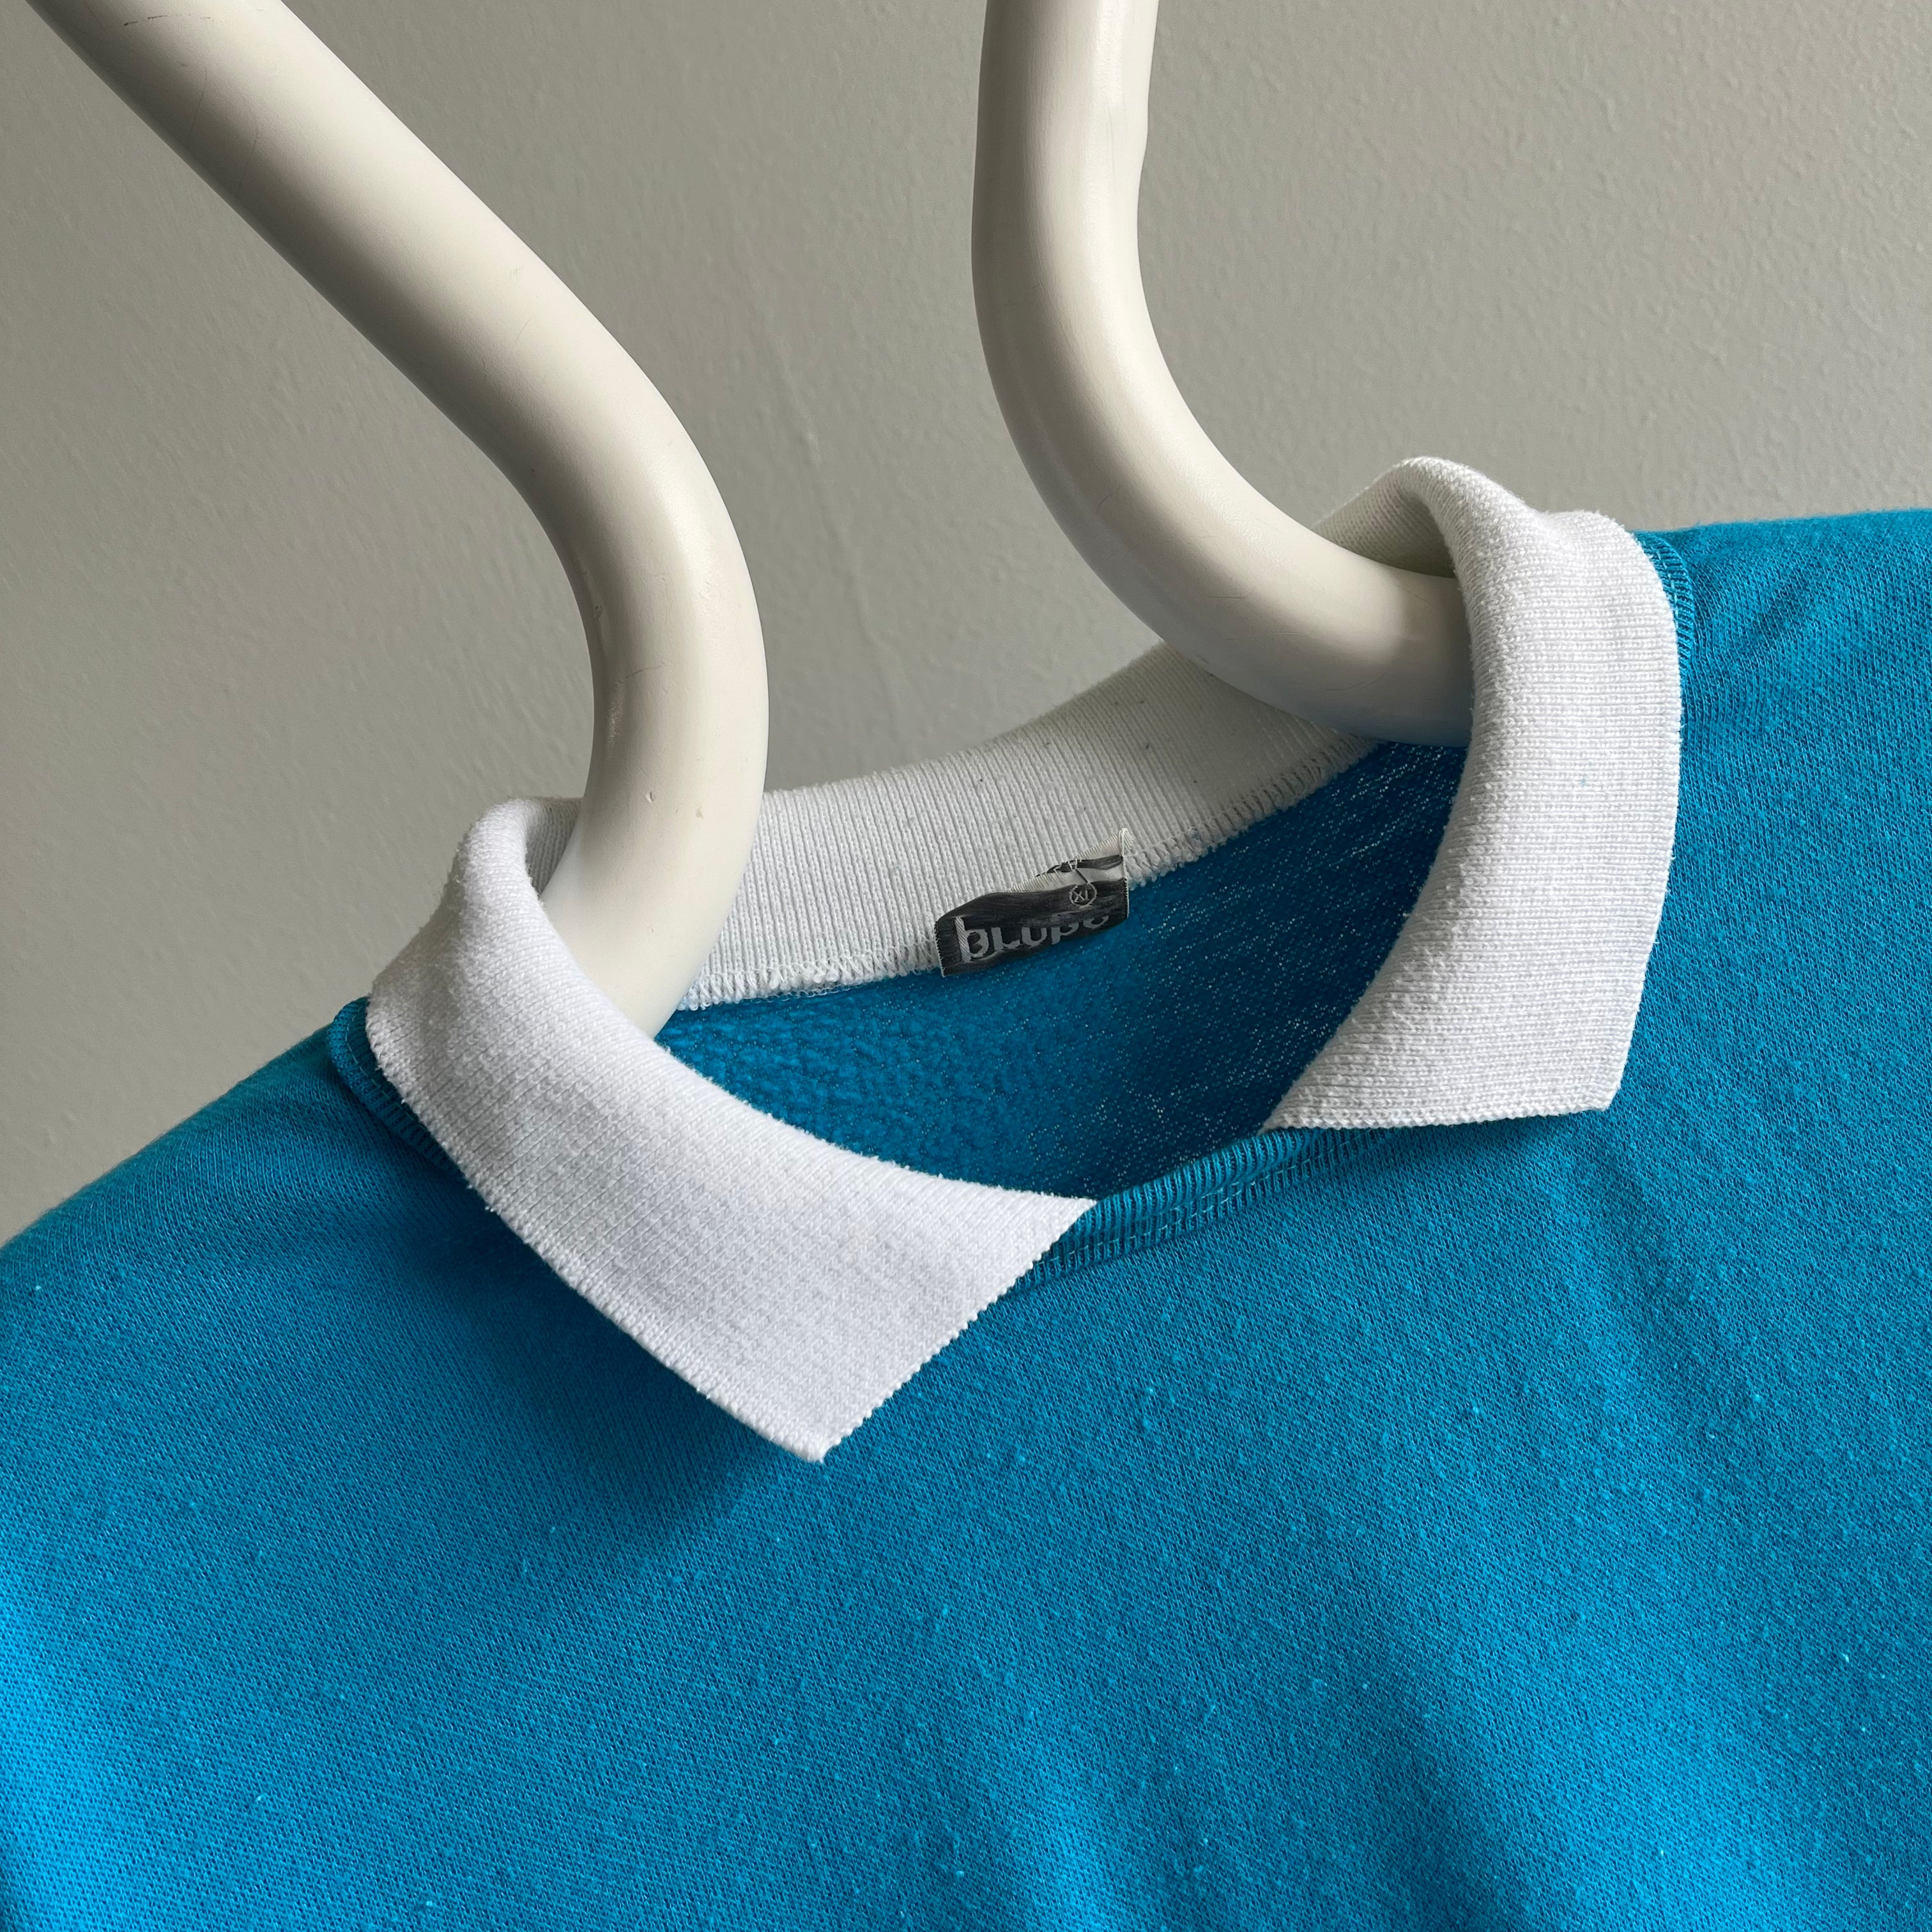 1980s Color Block Warm Up Polo - !!!